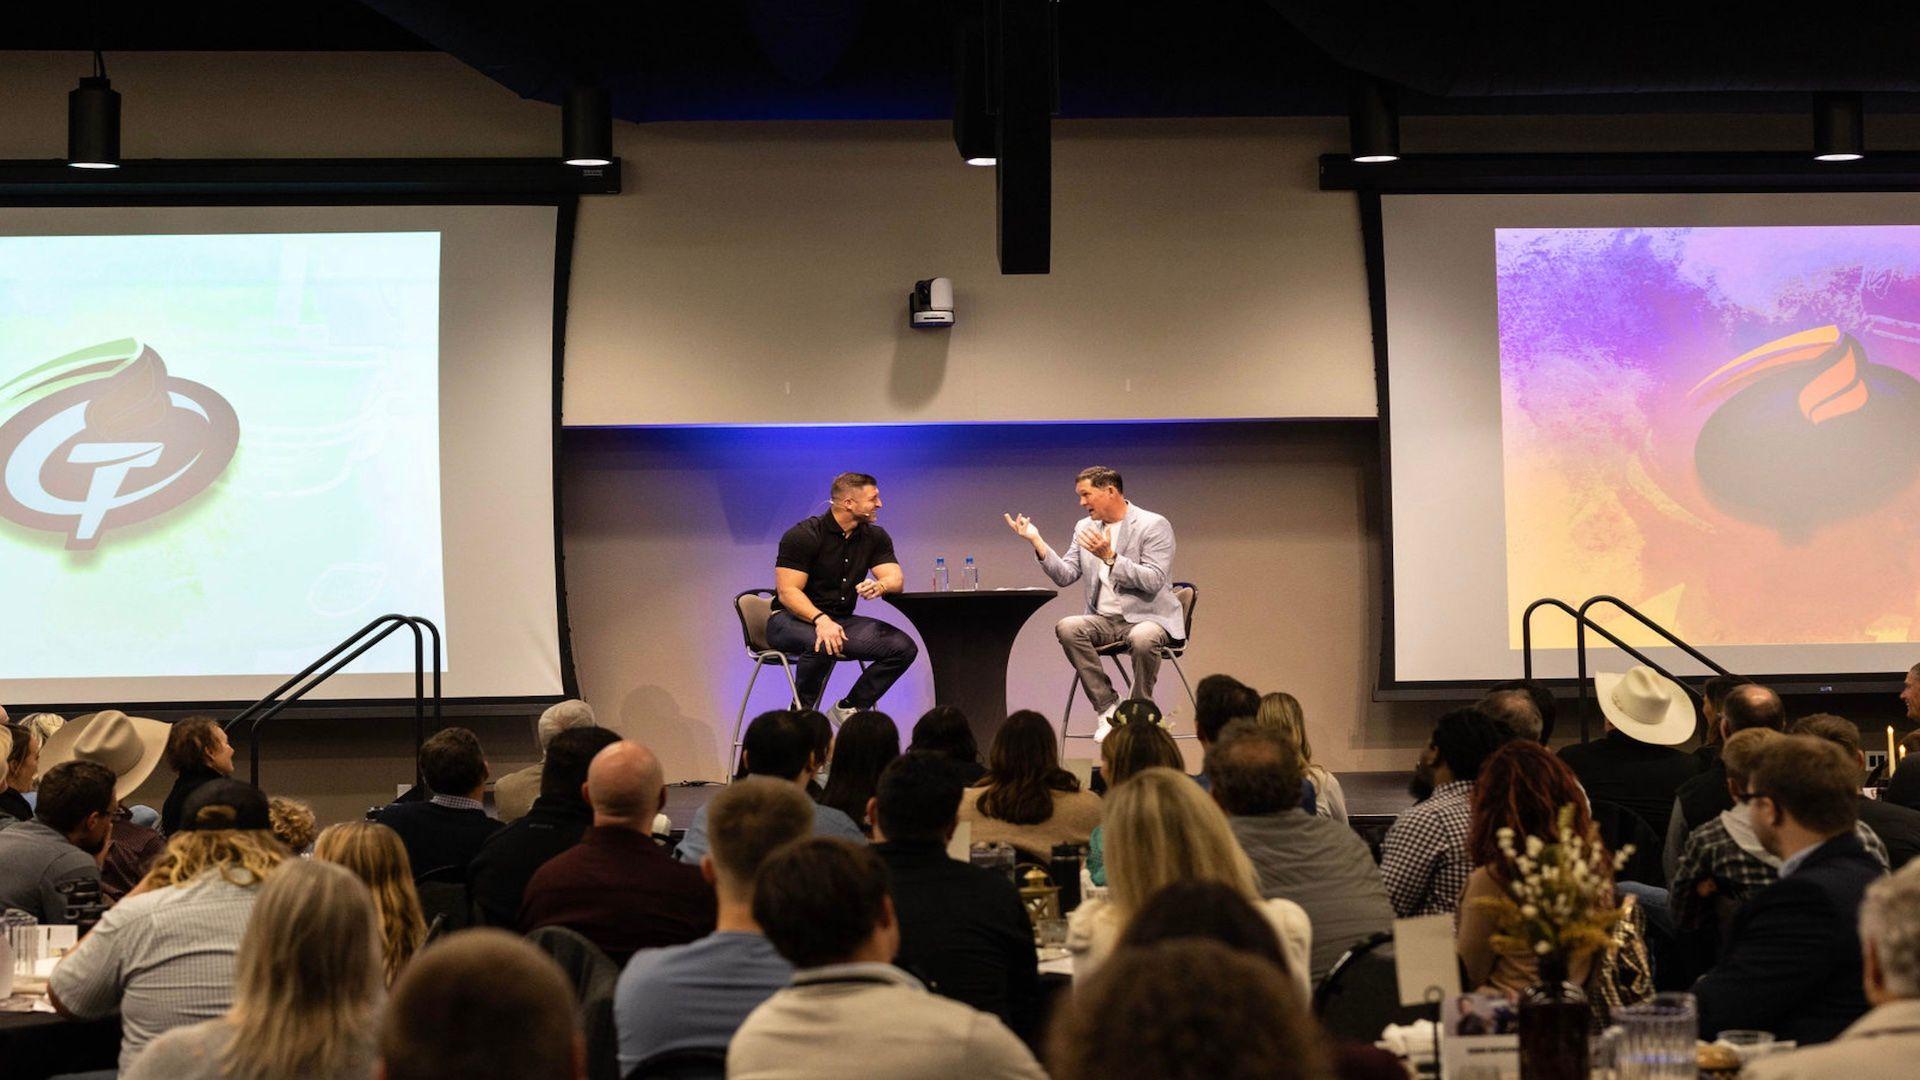 Direct Sportslink Secures Tim Tebow For Cross Training Ministries Christian Banquet Speaker